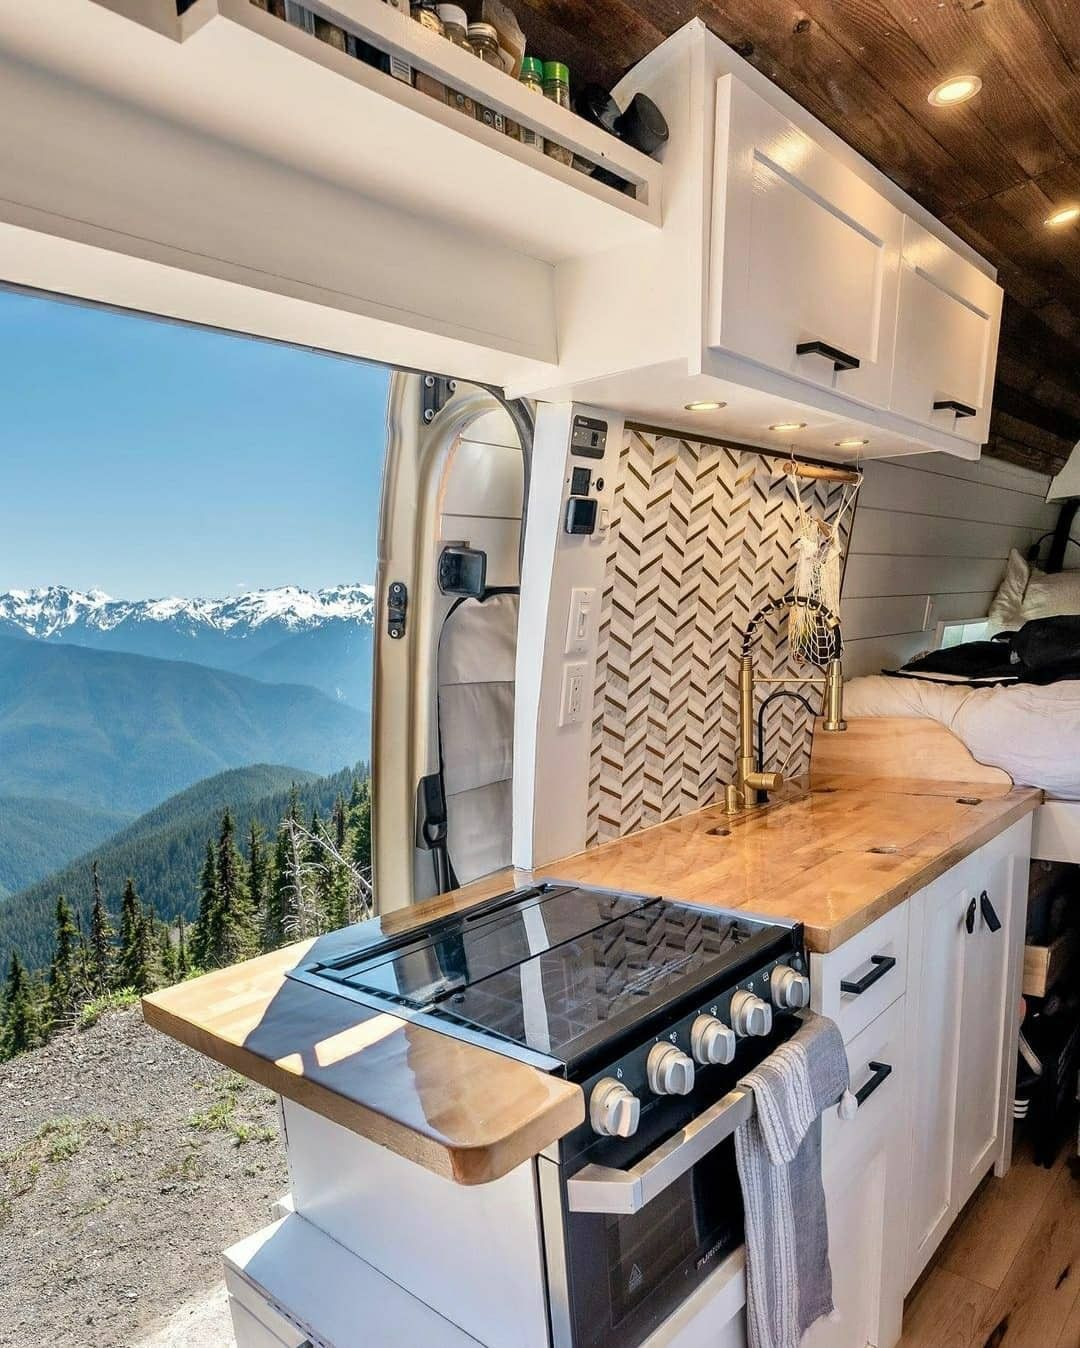 A kitchen counter top with a stove and kitchen faucet within a van. The van door is open displaying an exterior background scene of snow covered mountains. 